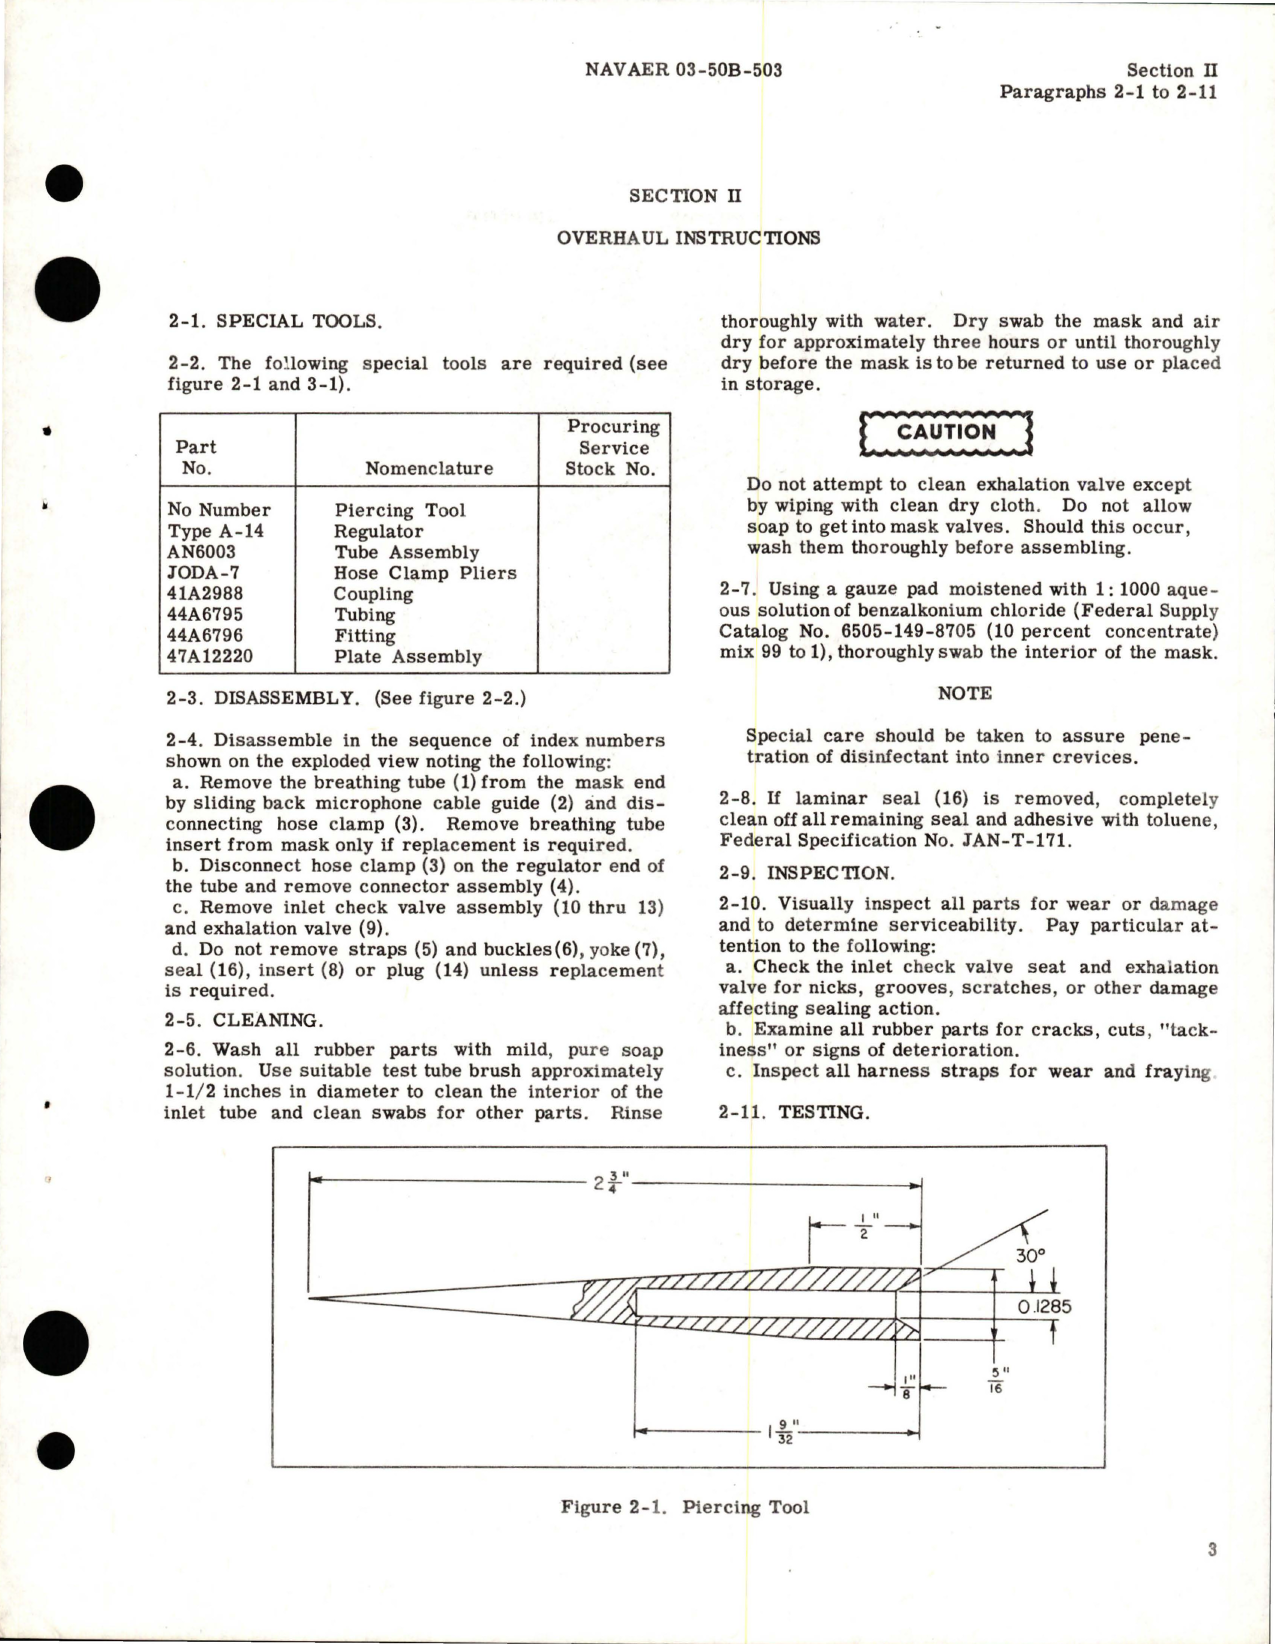 Sample page 5 from AirCorps Library document: Overhaul Instructions for Pressure Breathing Oxygen Mask - Type MS 22001 - Part 77900, 77901, and 77902 